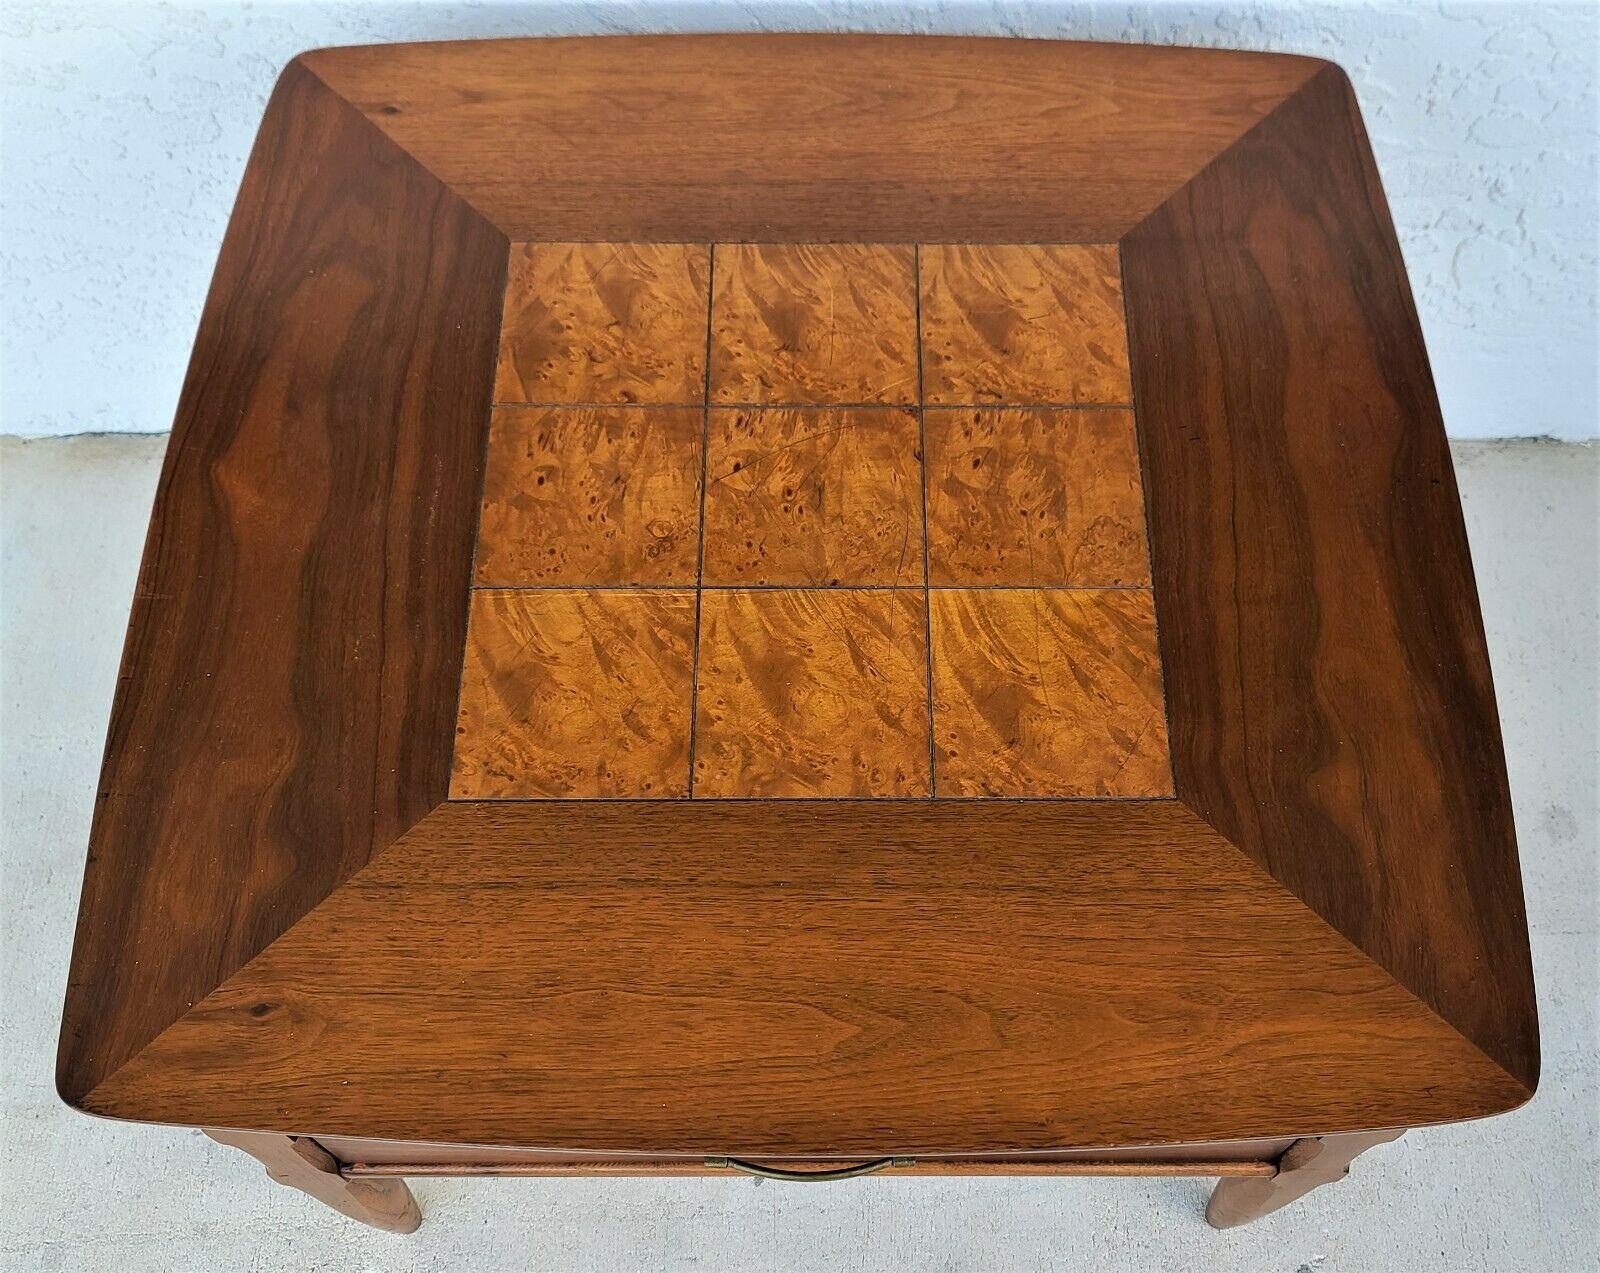 Offering one of our recent palm beach estate fine furniture acquisitions of A 
Vintage Lane MCM Walnut and Burl Side End with Table 2 Drawers 
Pretty sure it's model number 1923.

Approximate Measurements in Inches
20.25